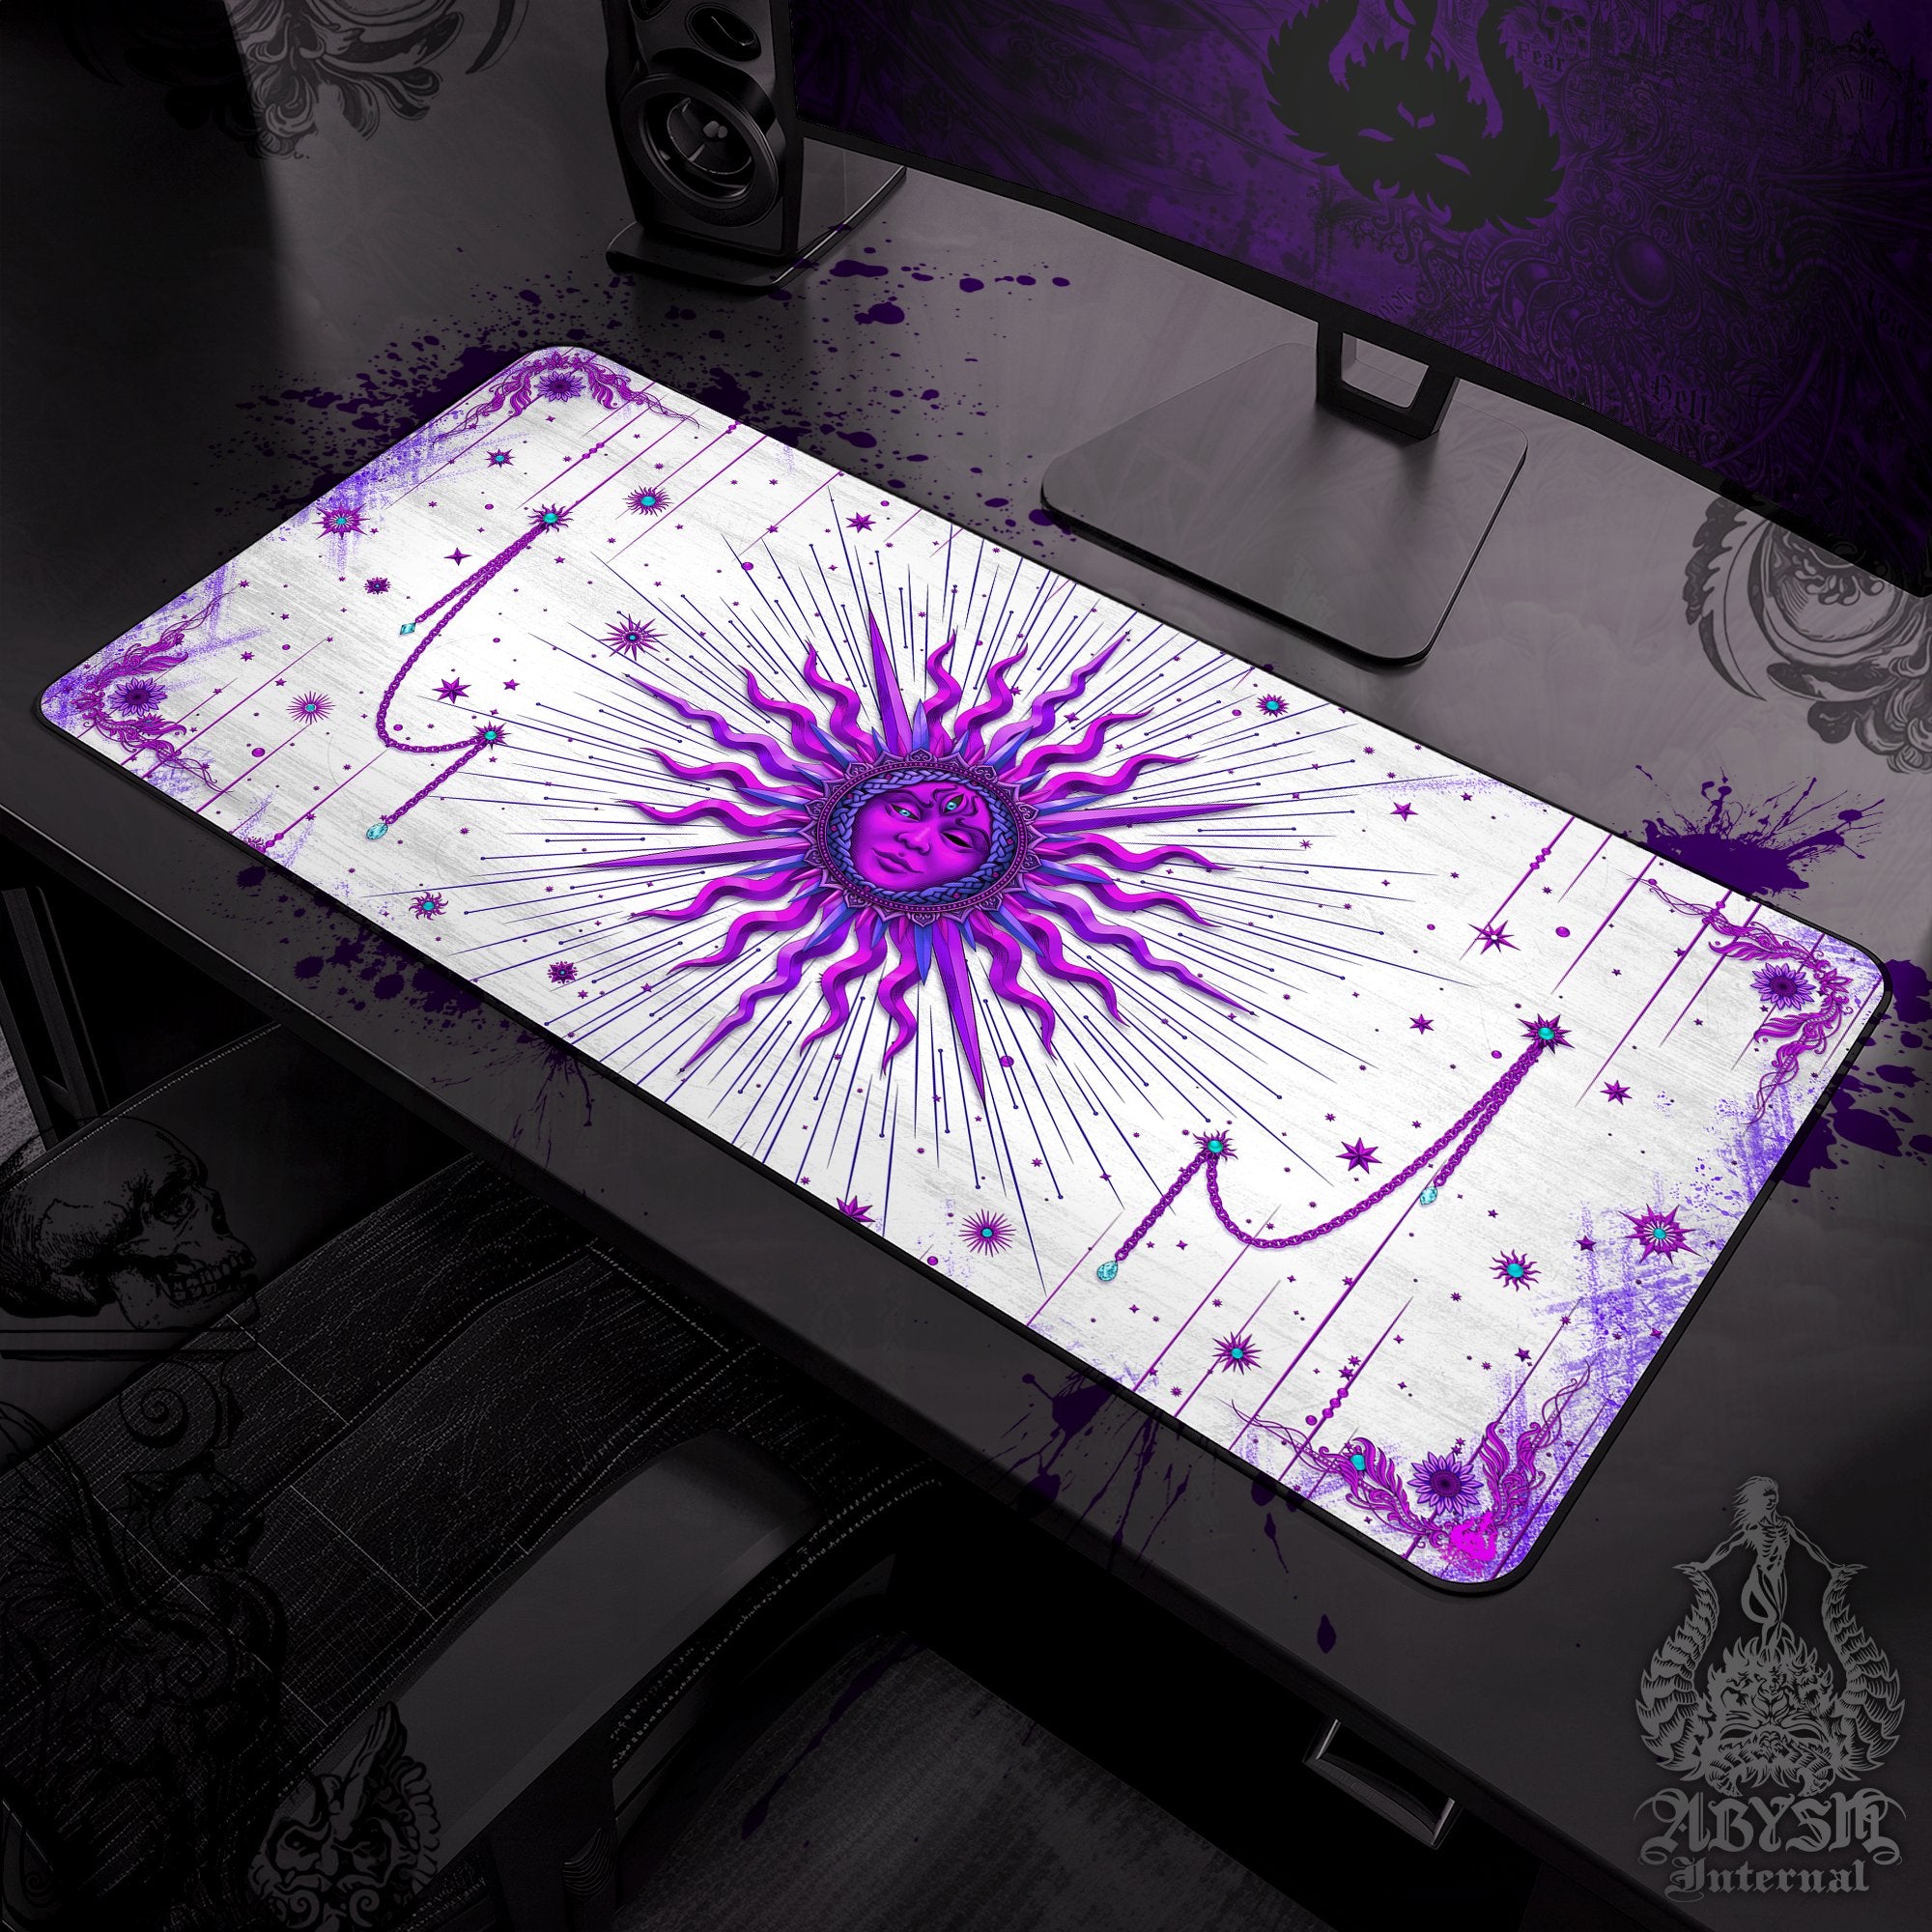 White Goth Workpad, Purple Sun Desk Mat, Tarot Arcana Gaming Mouse Pad, Witchy Table Protector Cover, Witch Room, Esoteric Art Print - Abysm Internal